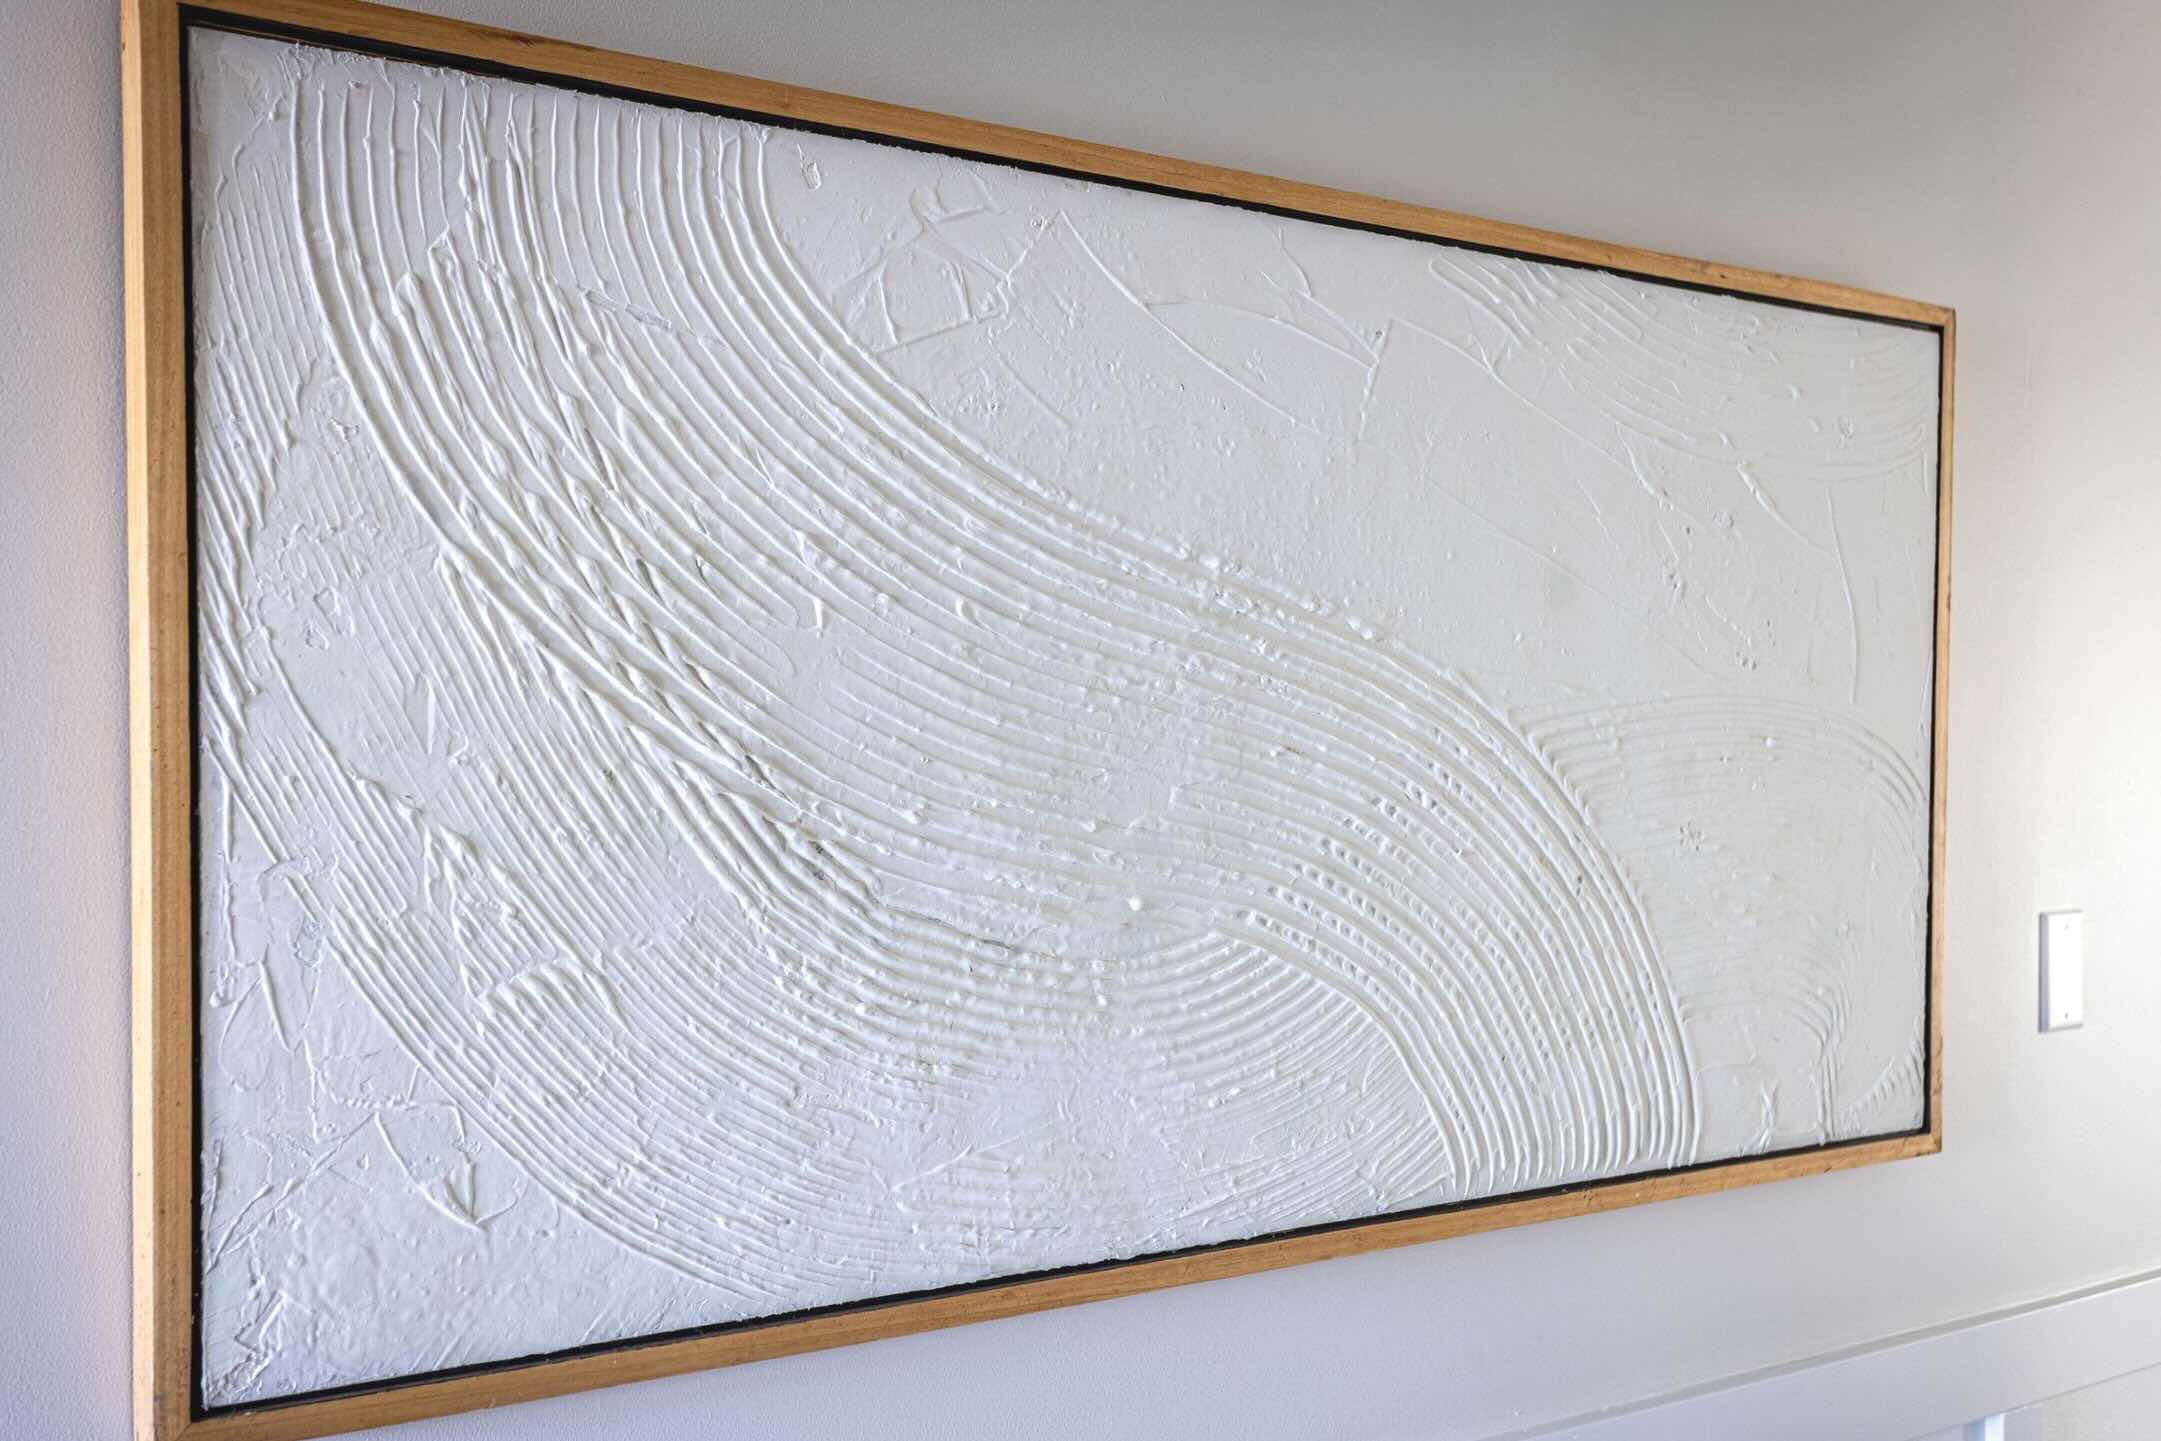 How To Make Textured Wall Art